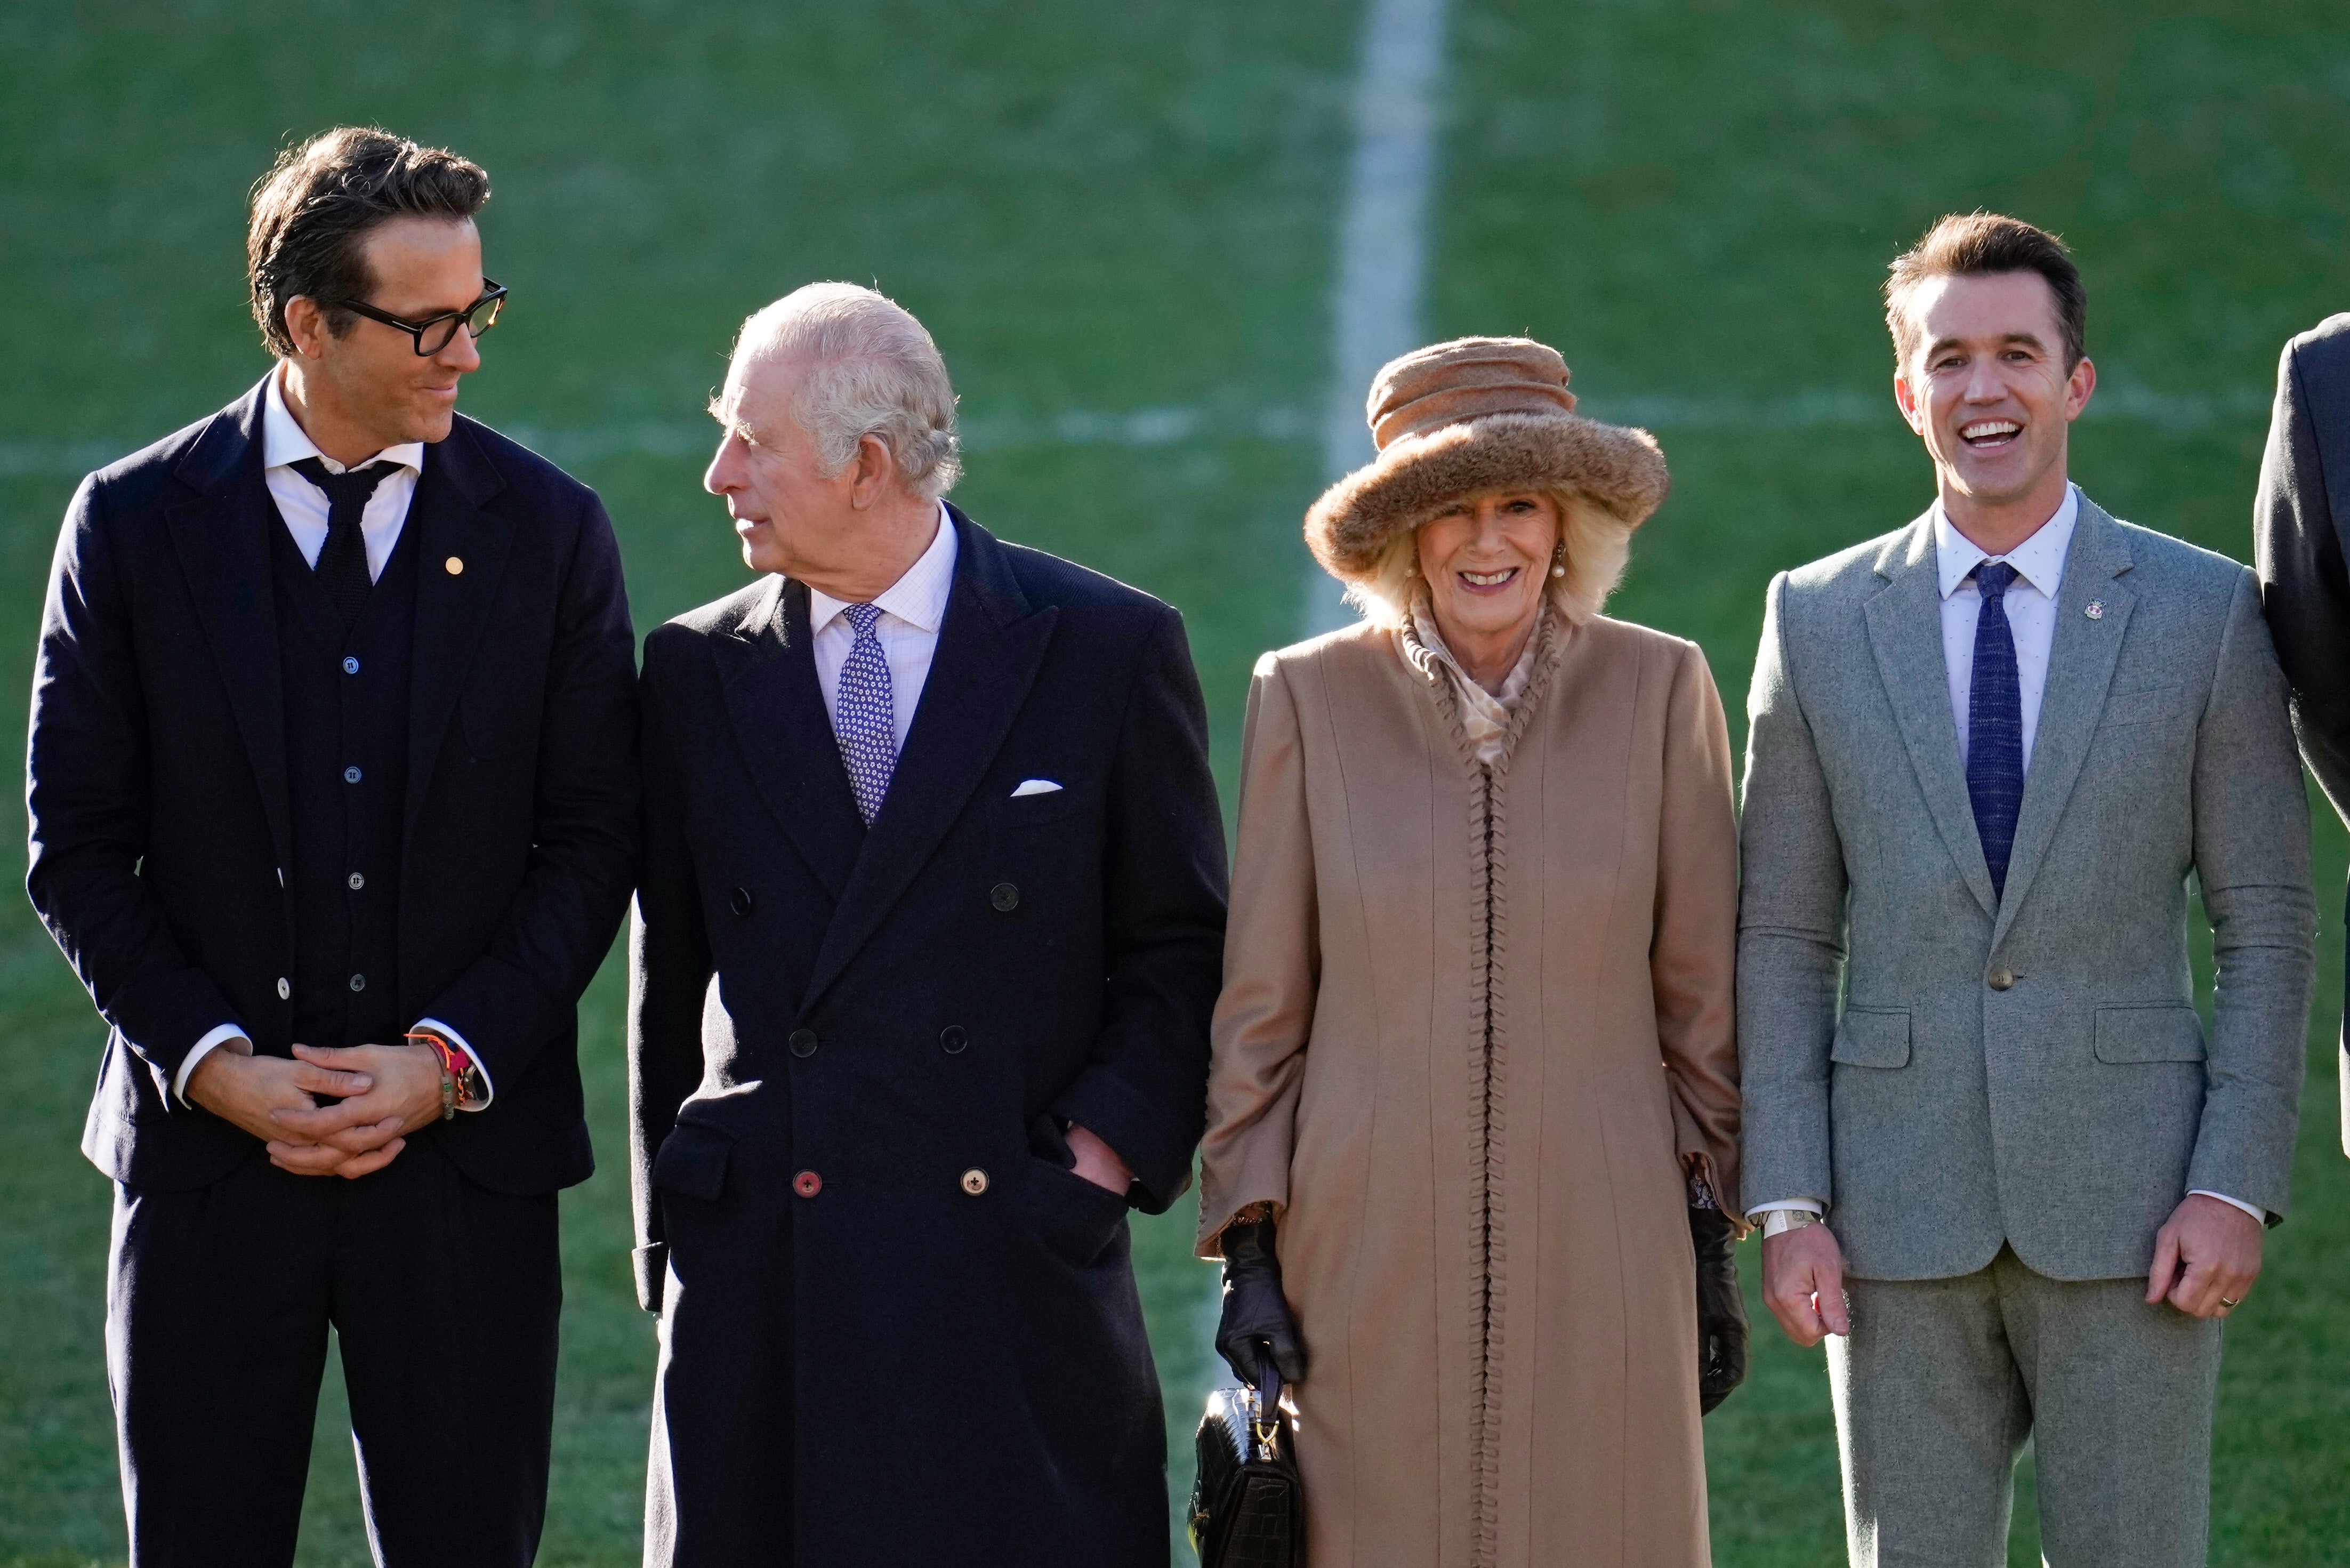 King Charles III and Camilla, Queen Consort talk to Wrexham AFC co-owners Ryan Reynolds and Rob McElhenney during their visit to Wrexham AFC on 9 December 2022